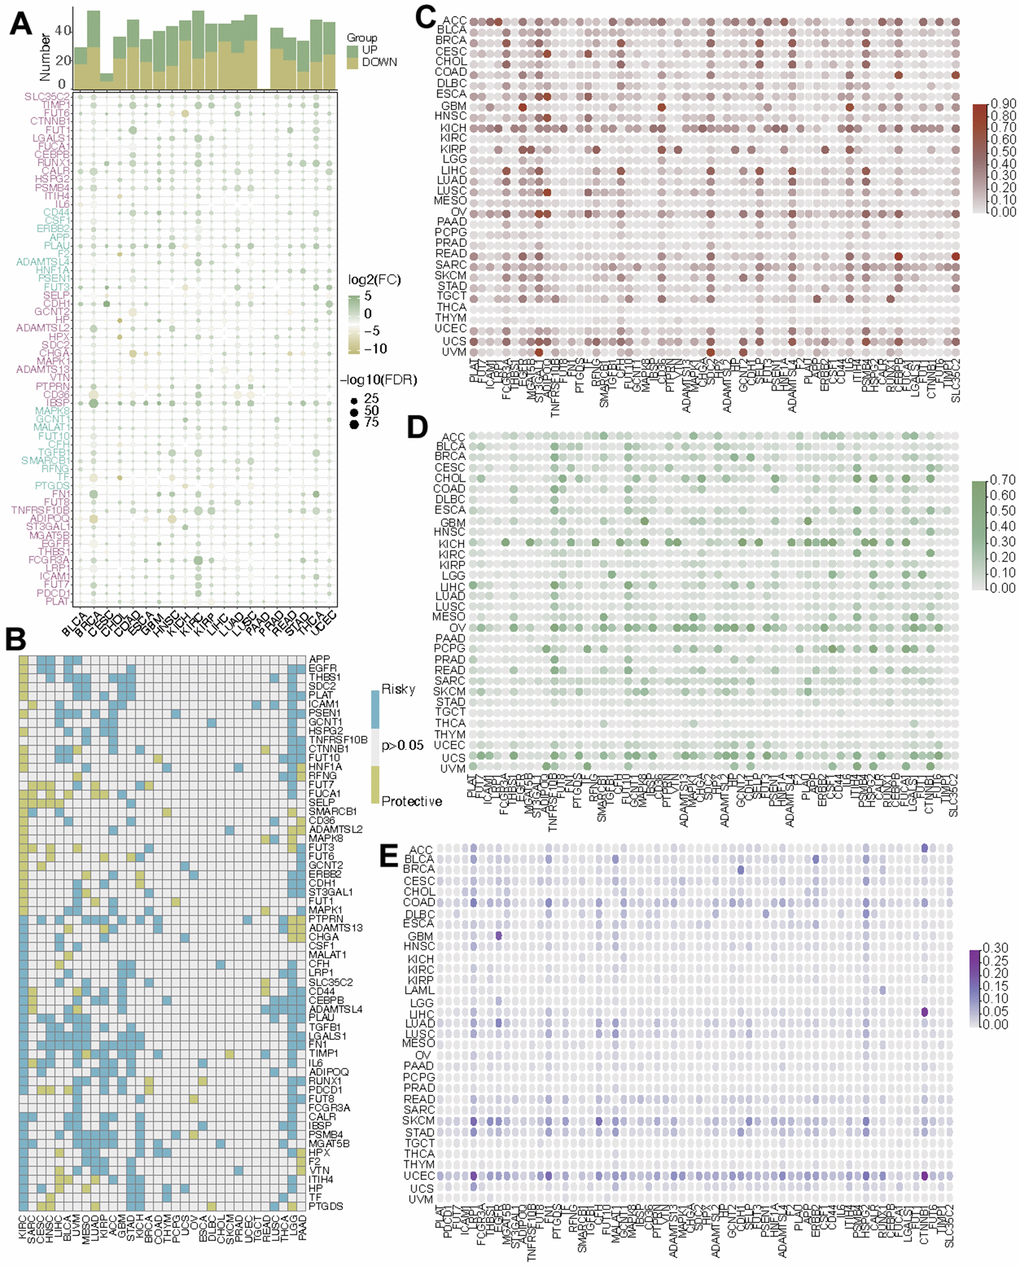 Pan-cancer analysis of CF-related hub genes. (A) The mRNA alteration, (B) the prognostic value, (C) the CNV gain, (D) the CNV loss, and (E) the SNV frequency of CF-related hub genes.